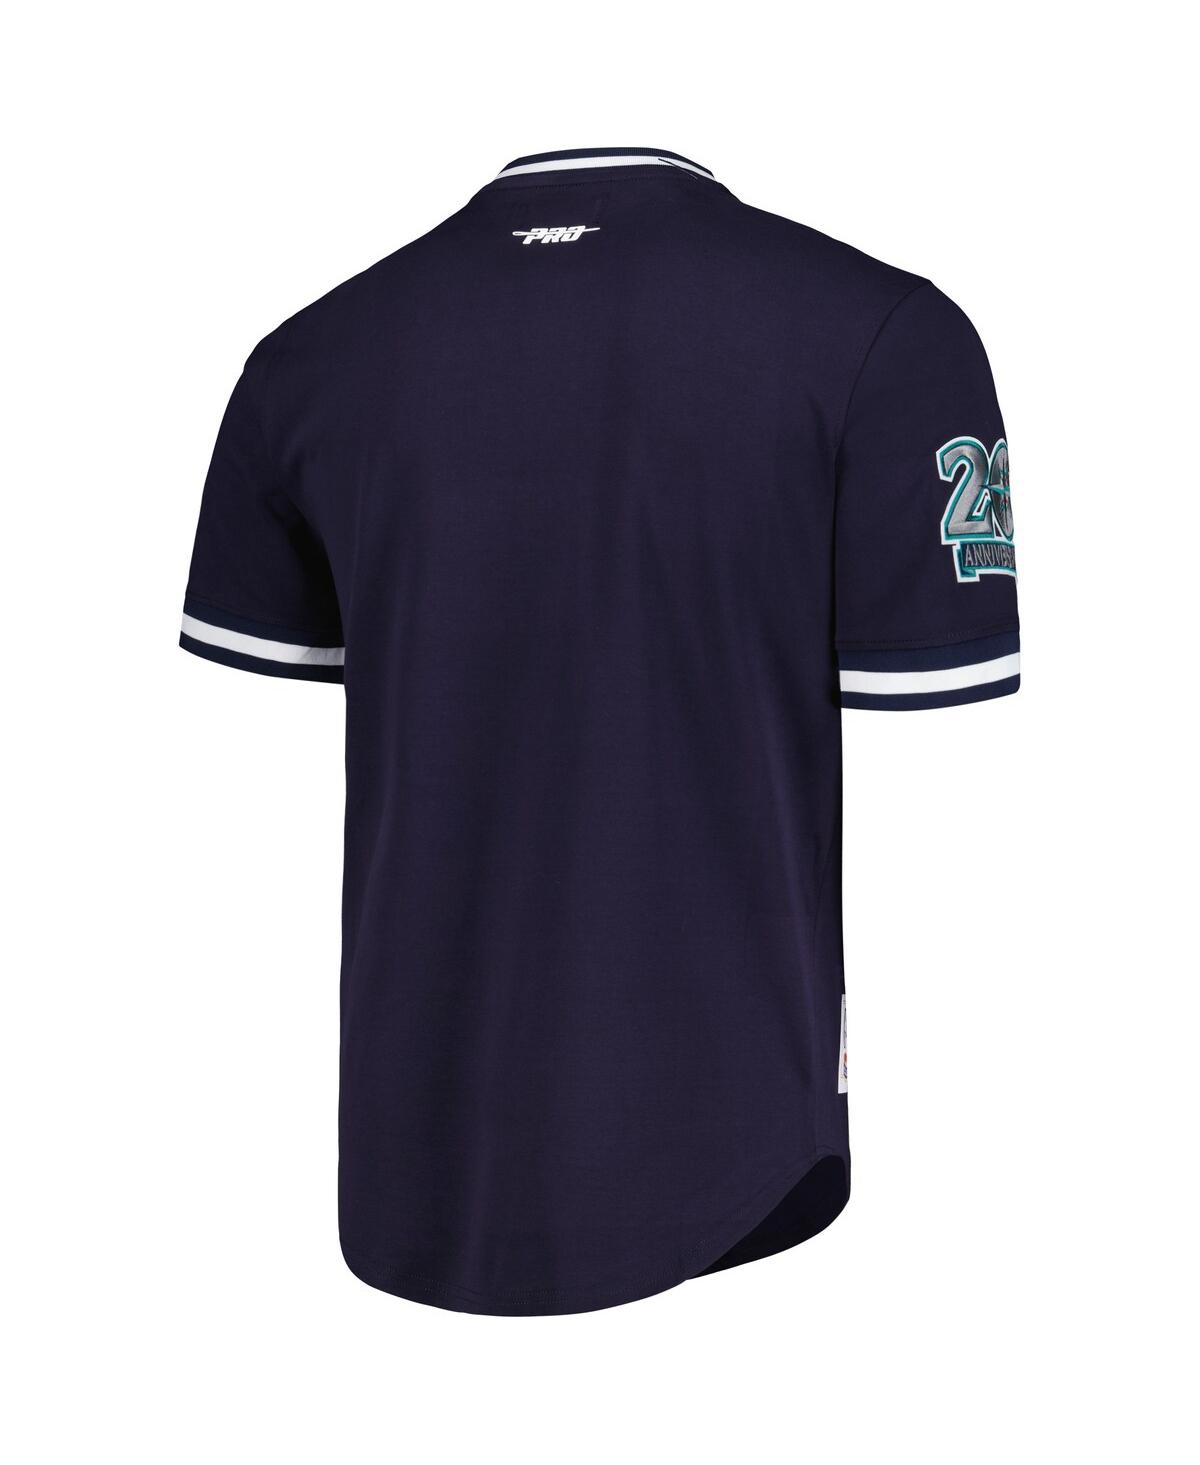 Shop Pro Standard Men's  Navy Seattle Mariners Cooperstown Collection Retro Classic T-shirt